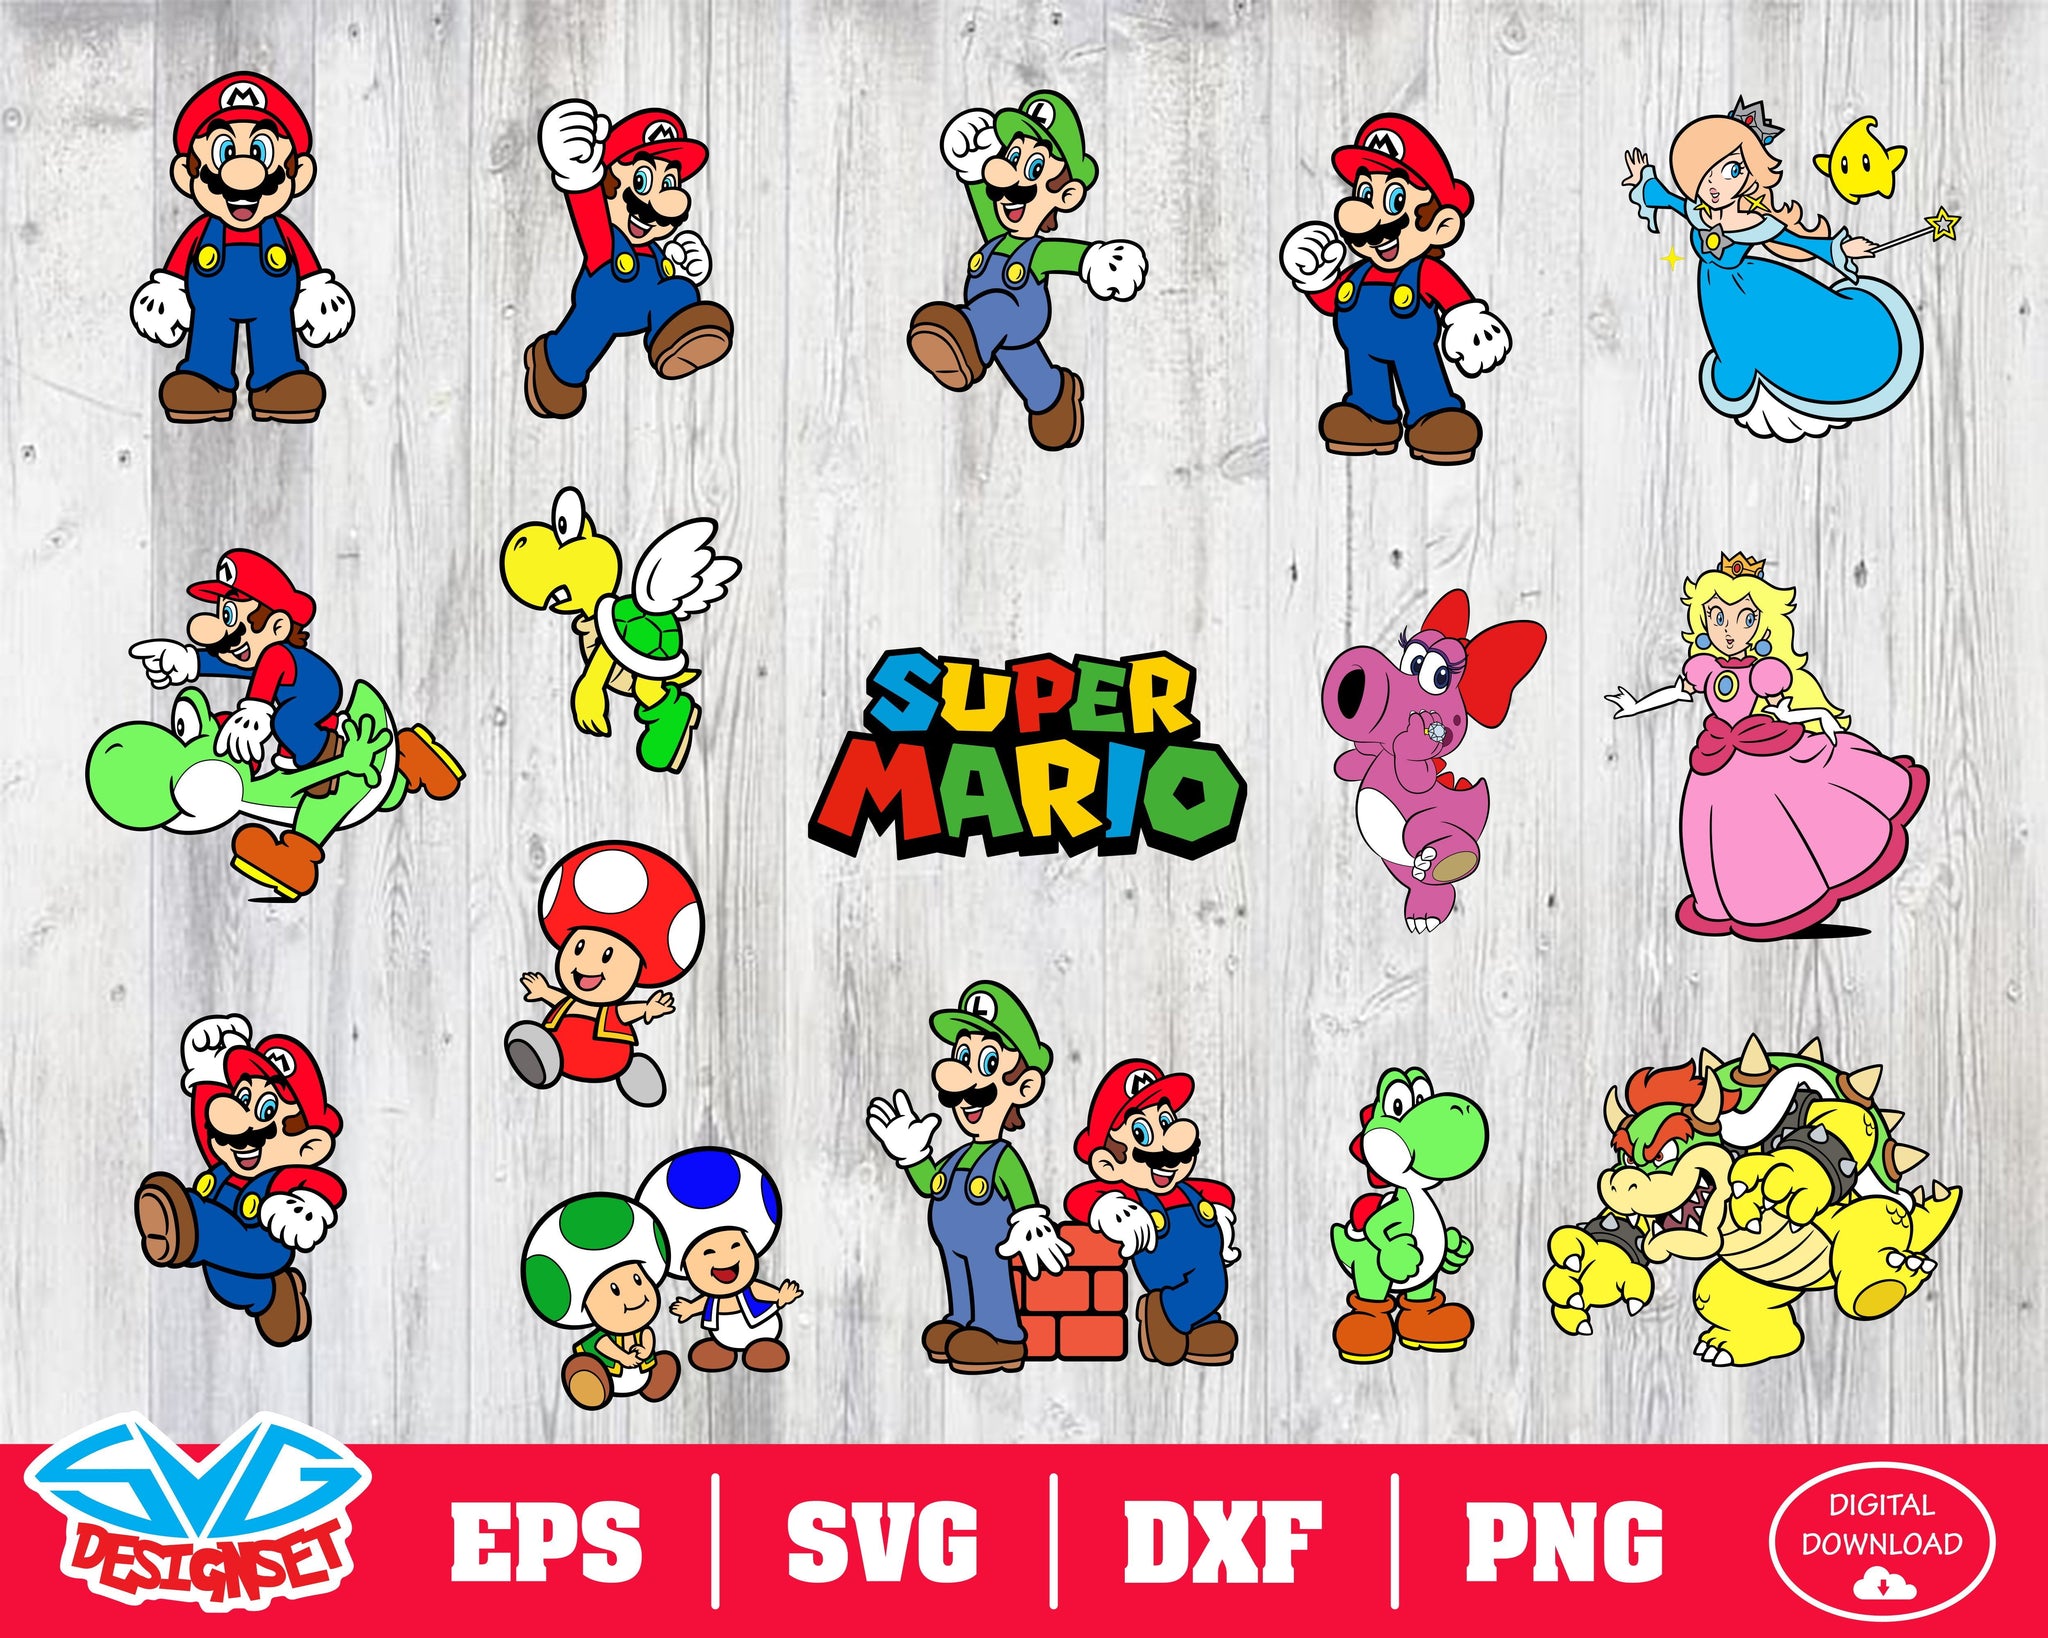 Super Mario Svg, Dxf, Eps, Png, Clipart, Silhouette and ...